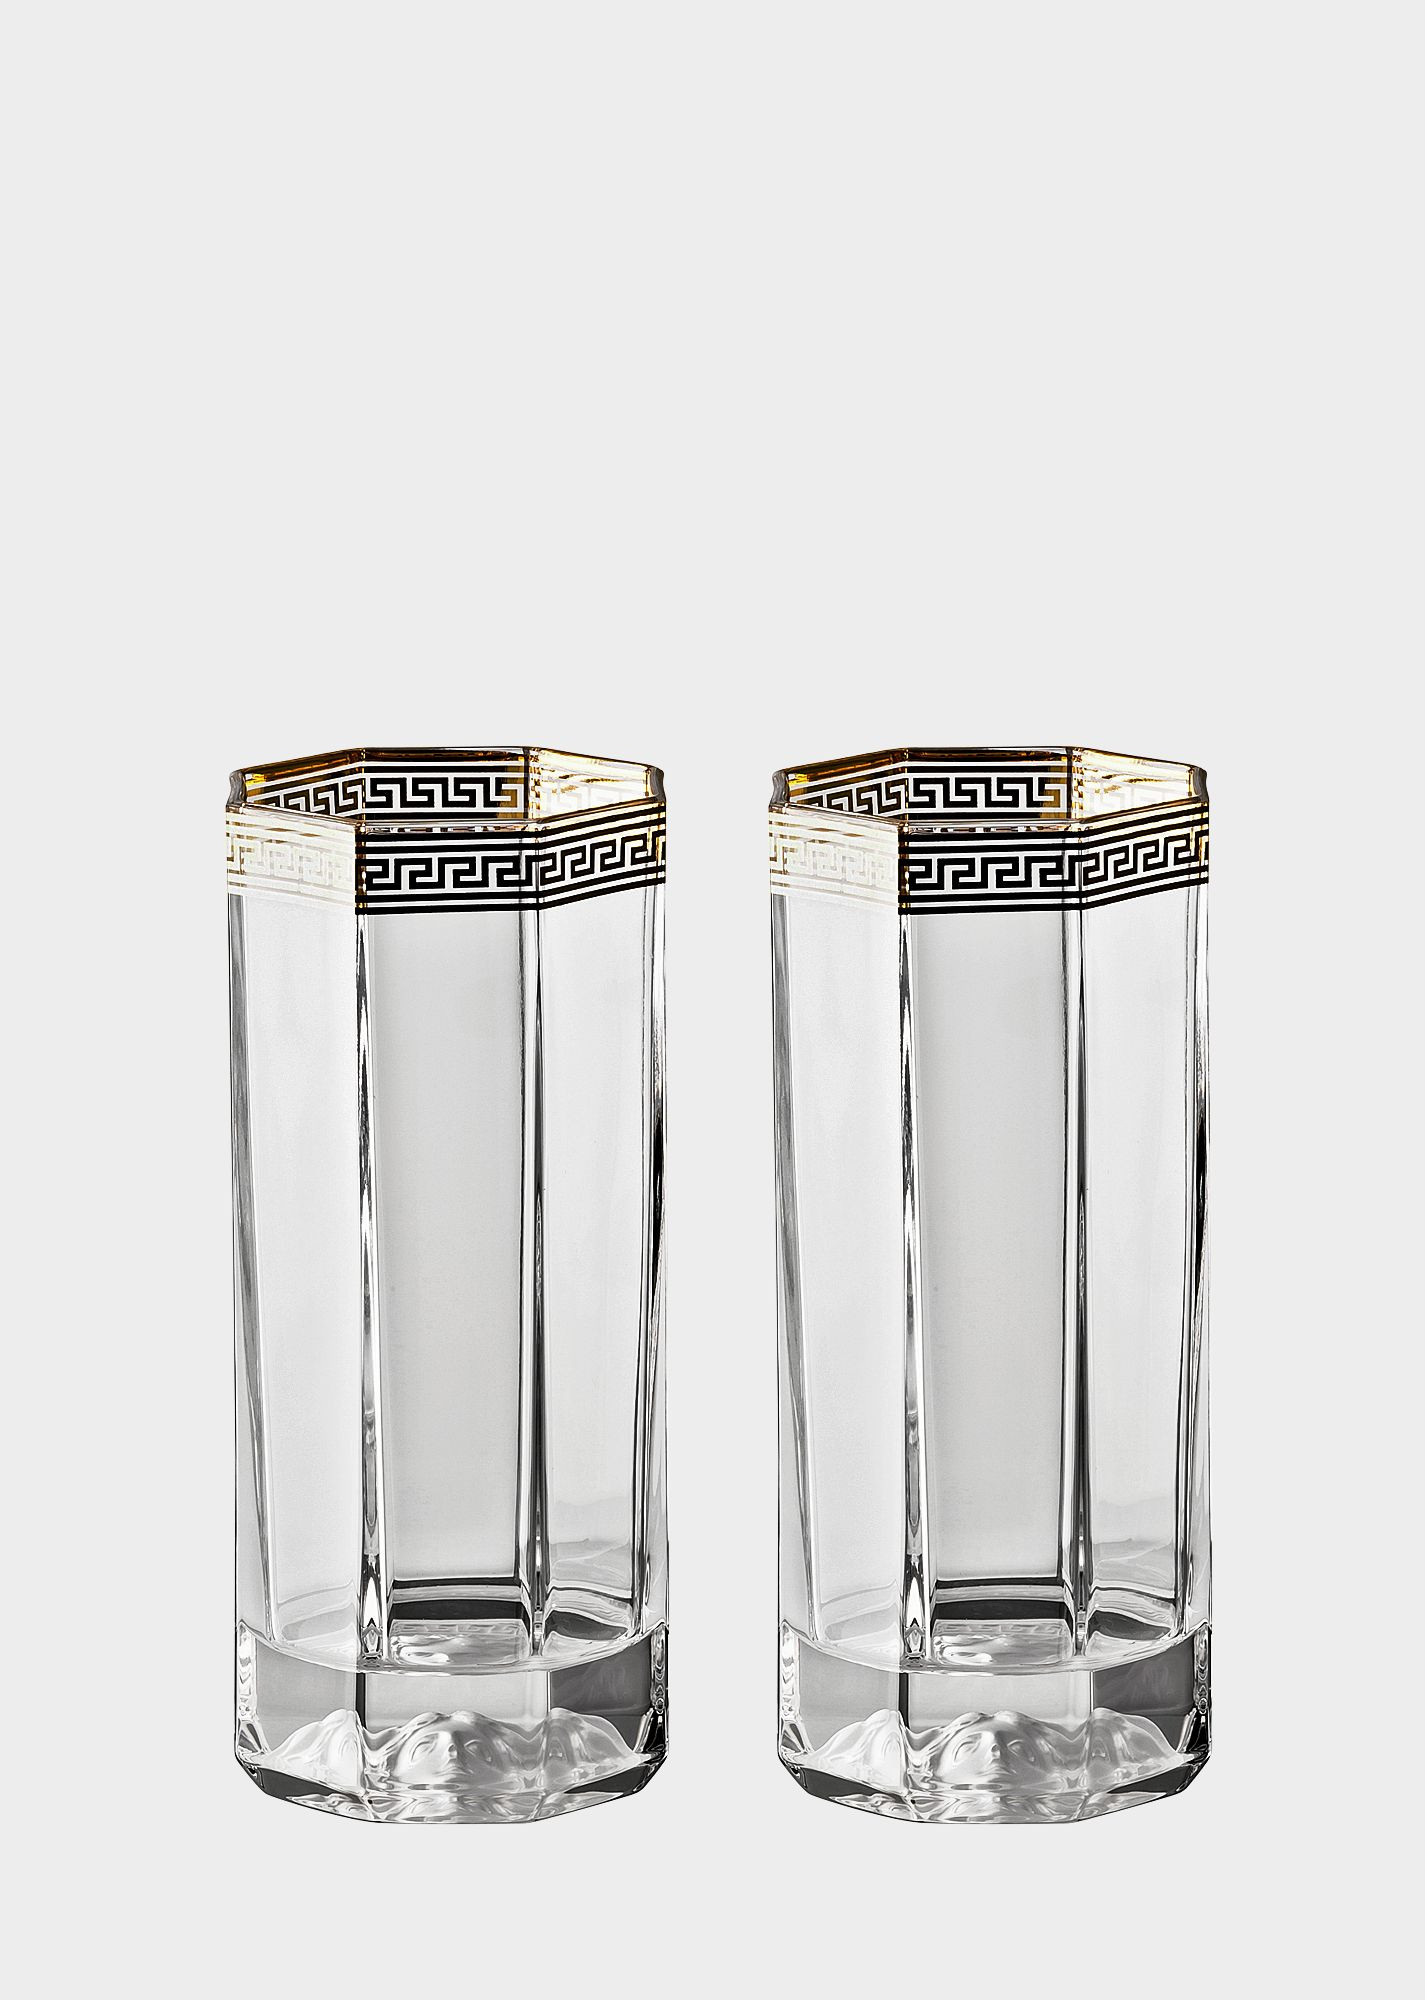 13 Popular Heavy Cut Glass Vase 2024 free download heavy cut glass vase of 21 crystal glass vase the weekly world within versace home luxury glass crystal